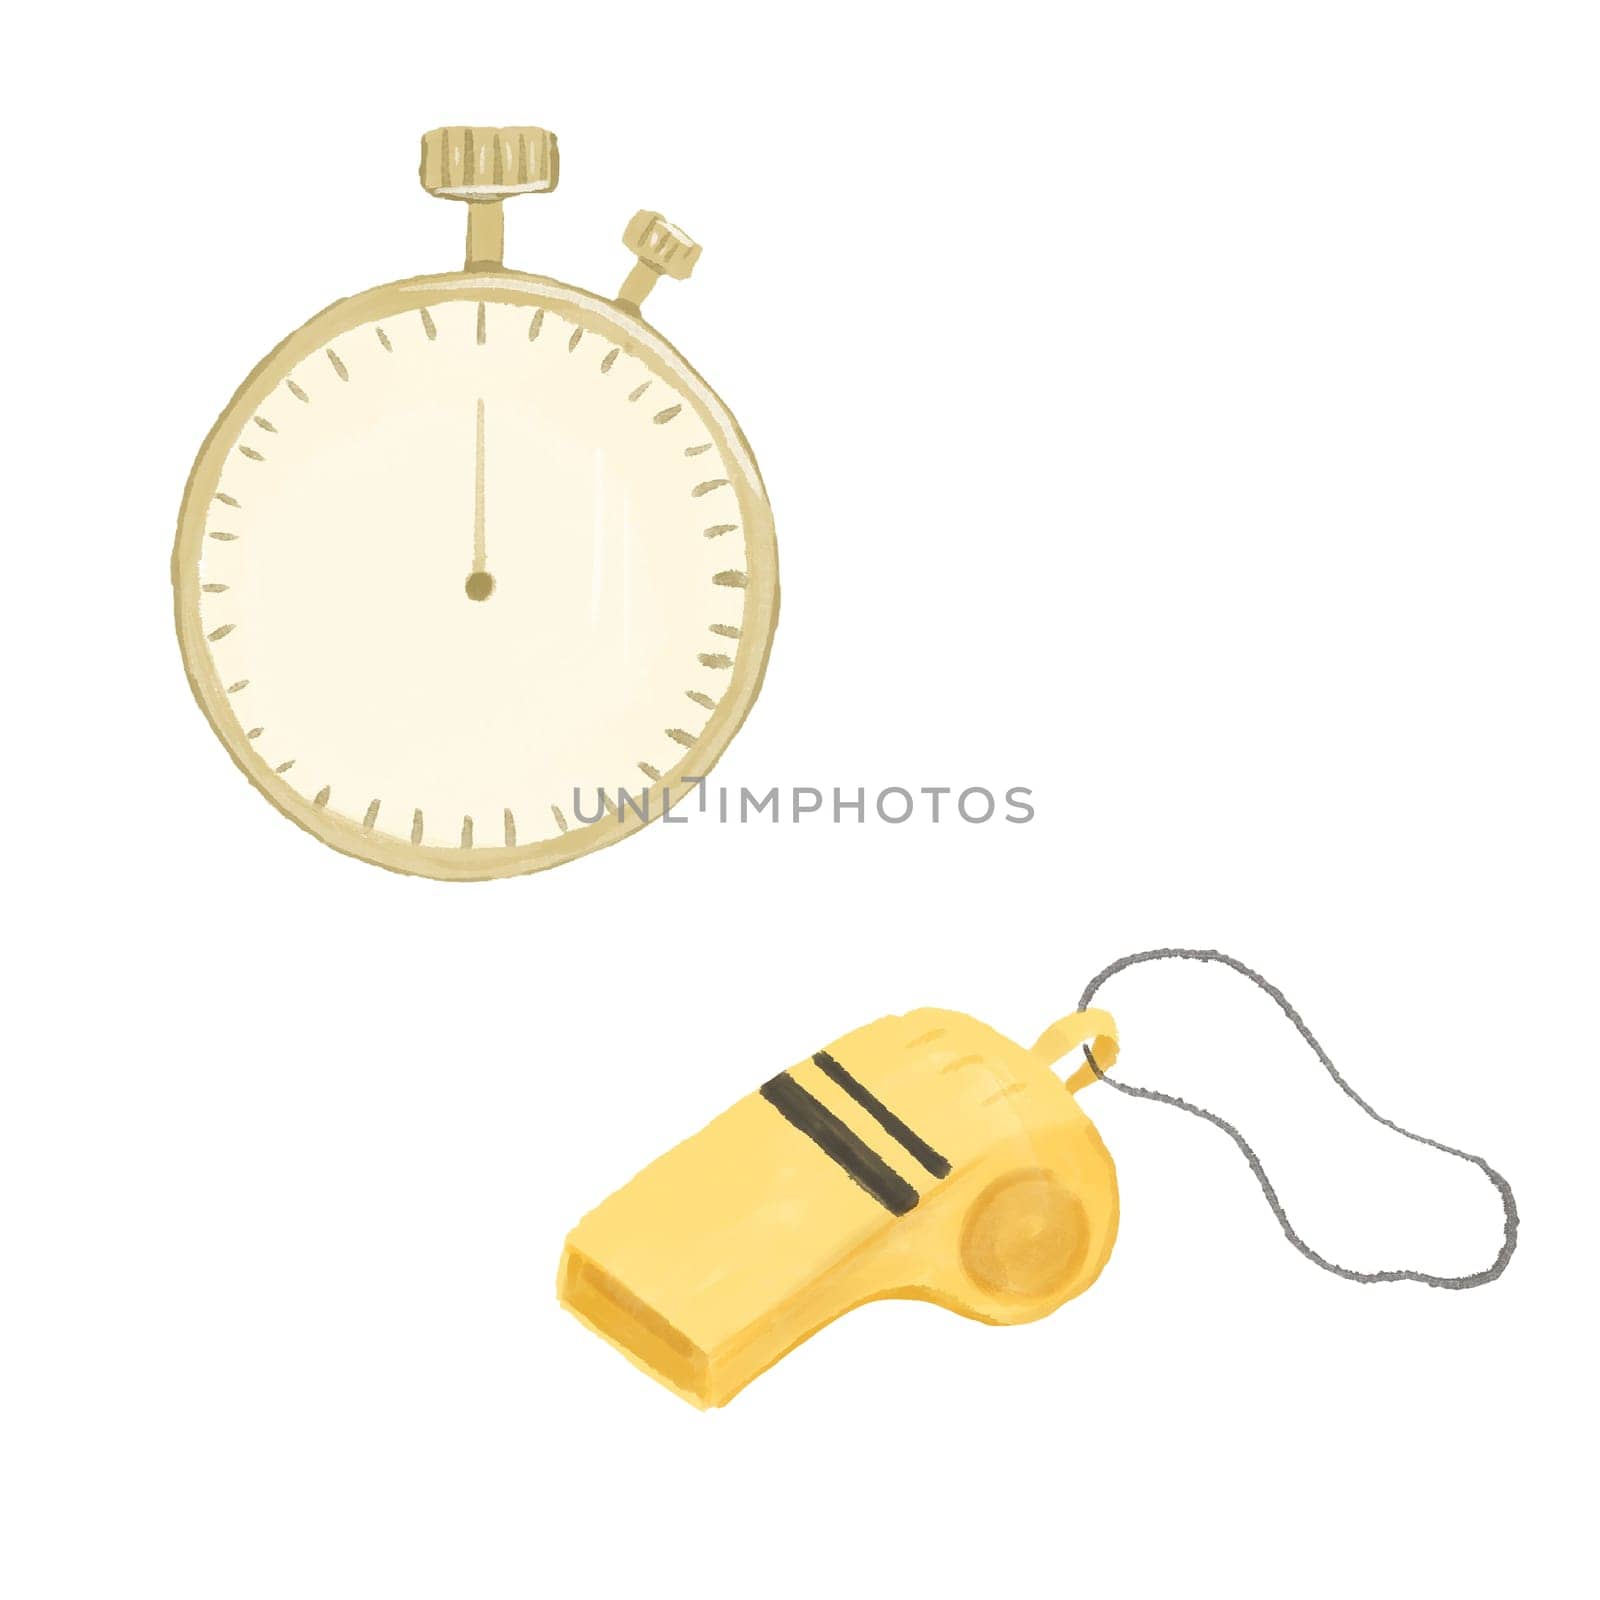 Hand drawn stopwatch timer and whistle. Stopwatch quick delivery speed concept, express and urgent services. by ElenaPlatova